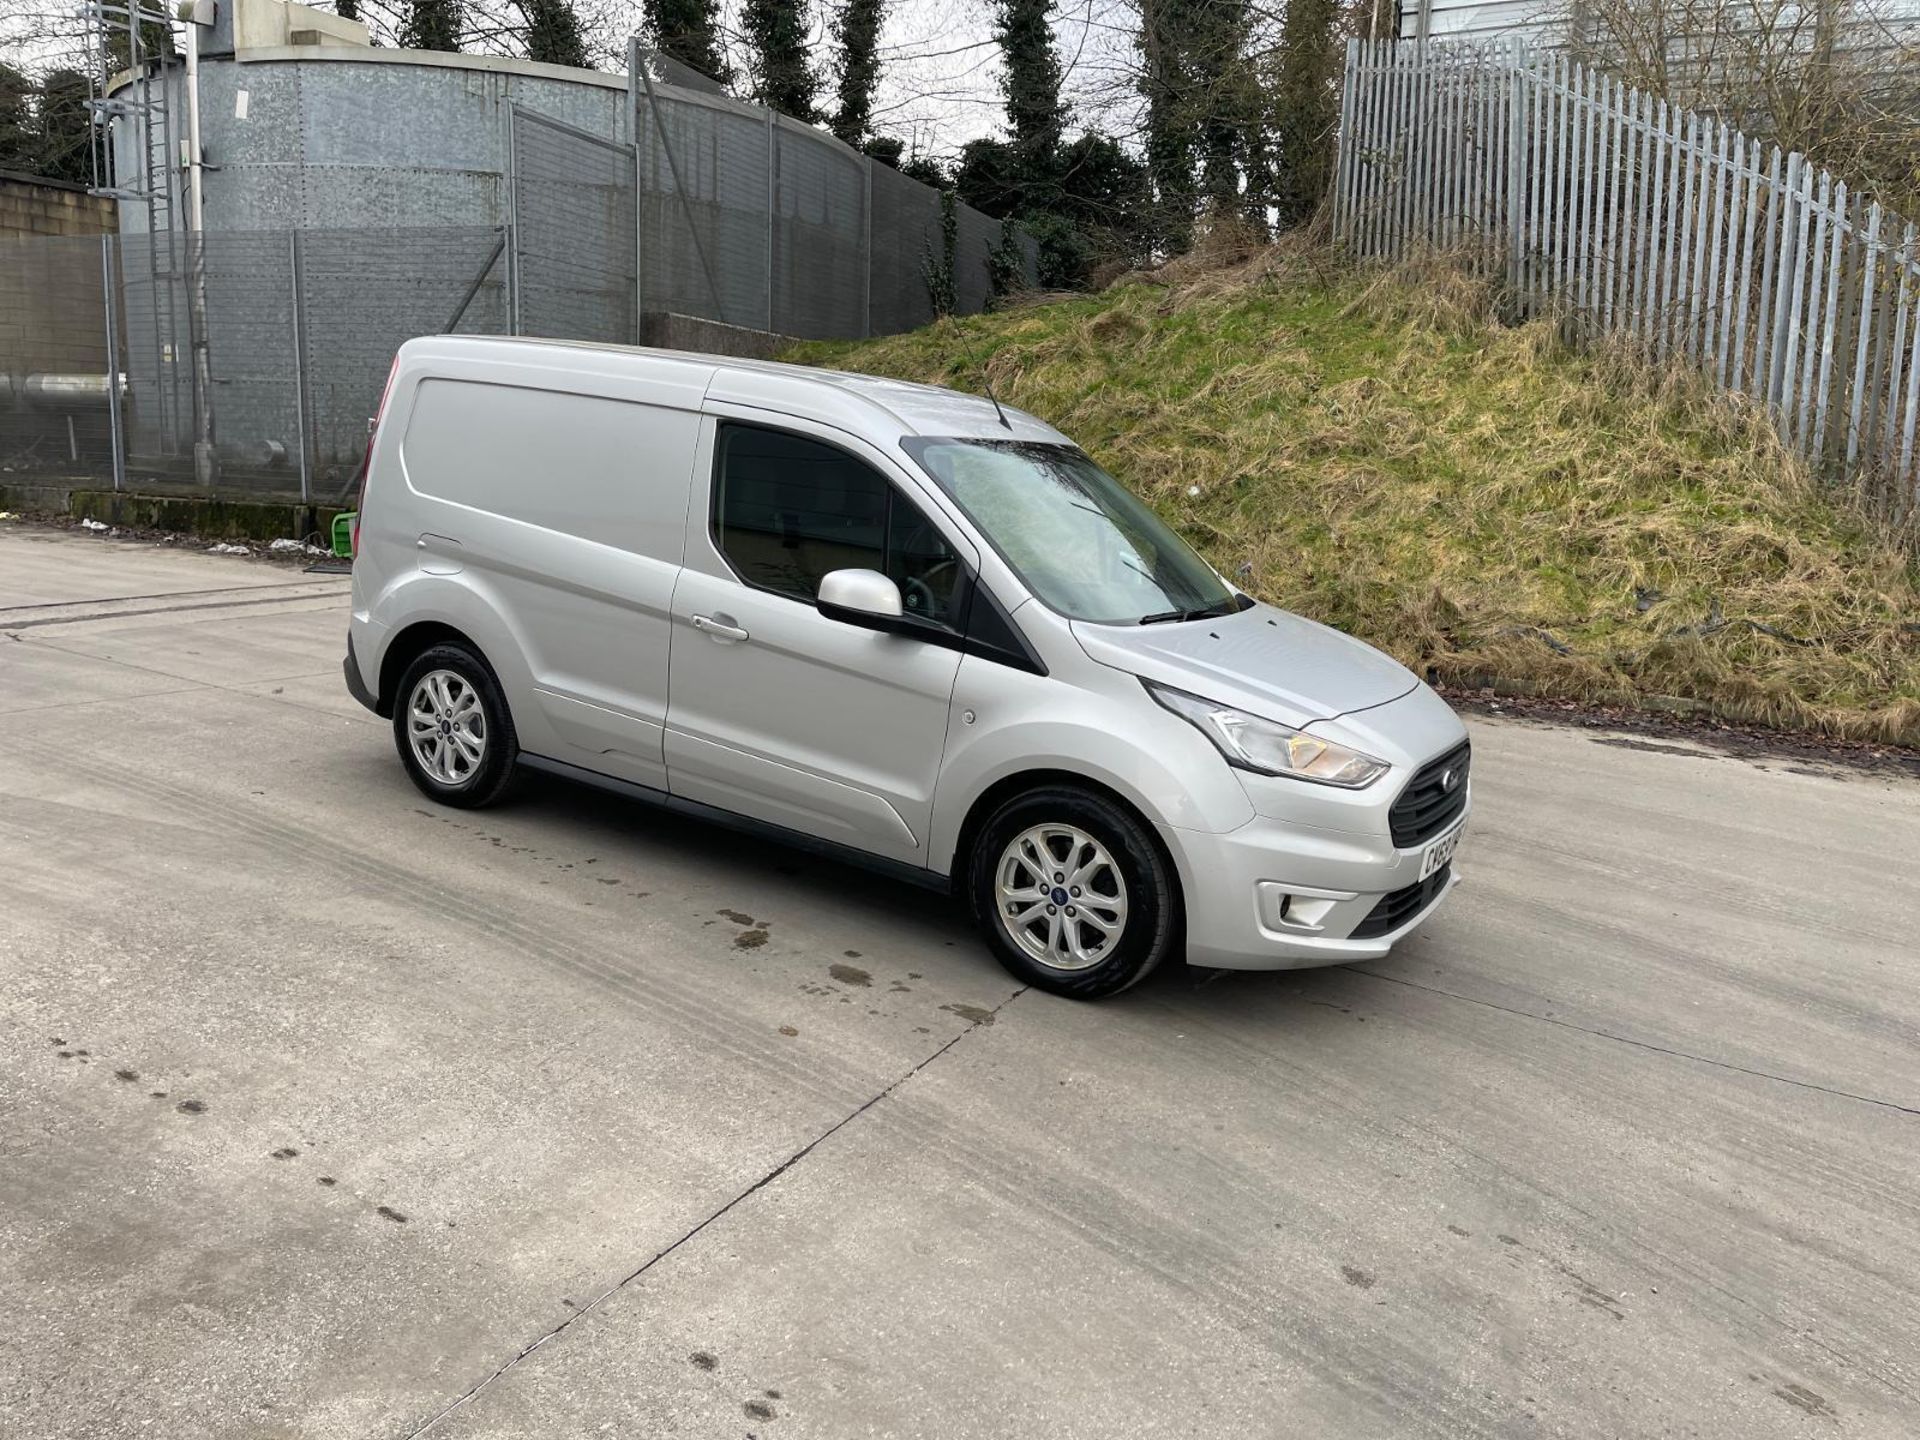 2019 FORD TRANSIT CONNECT LIMITED: POWERFUL 1.5 TDCI DIESEL - Image 9 of 12